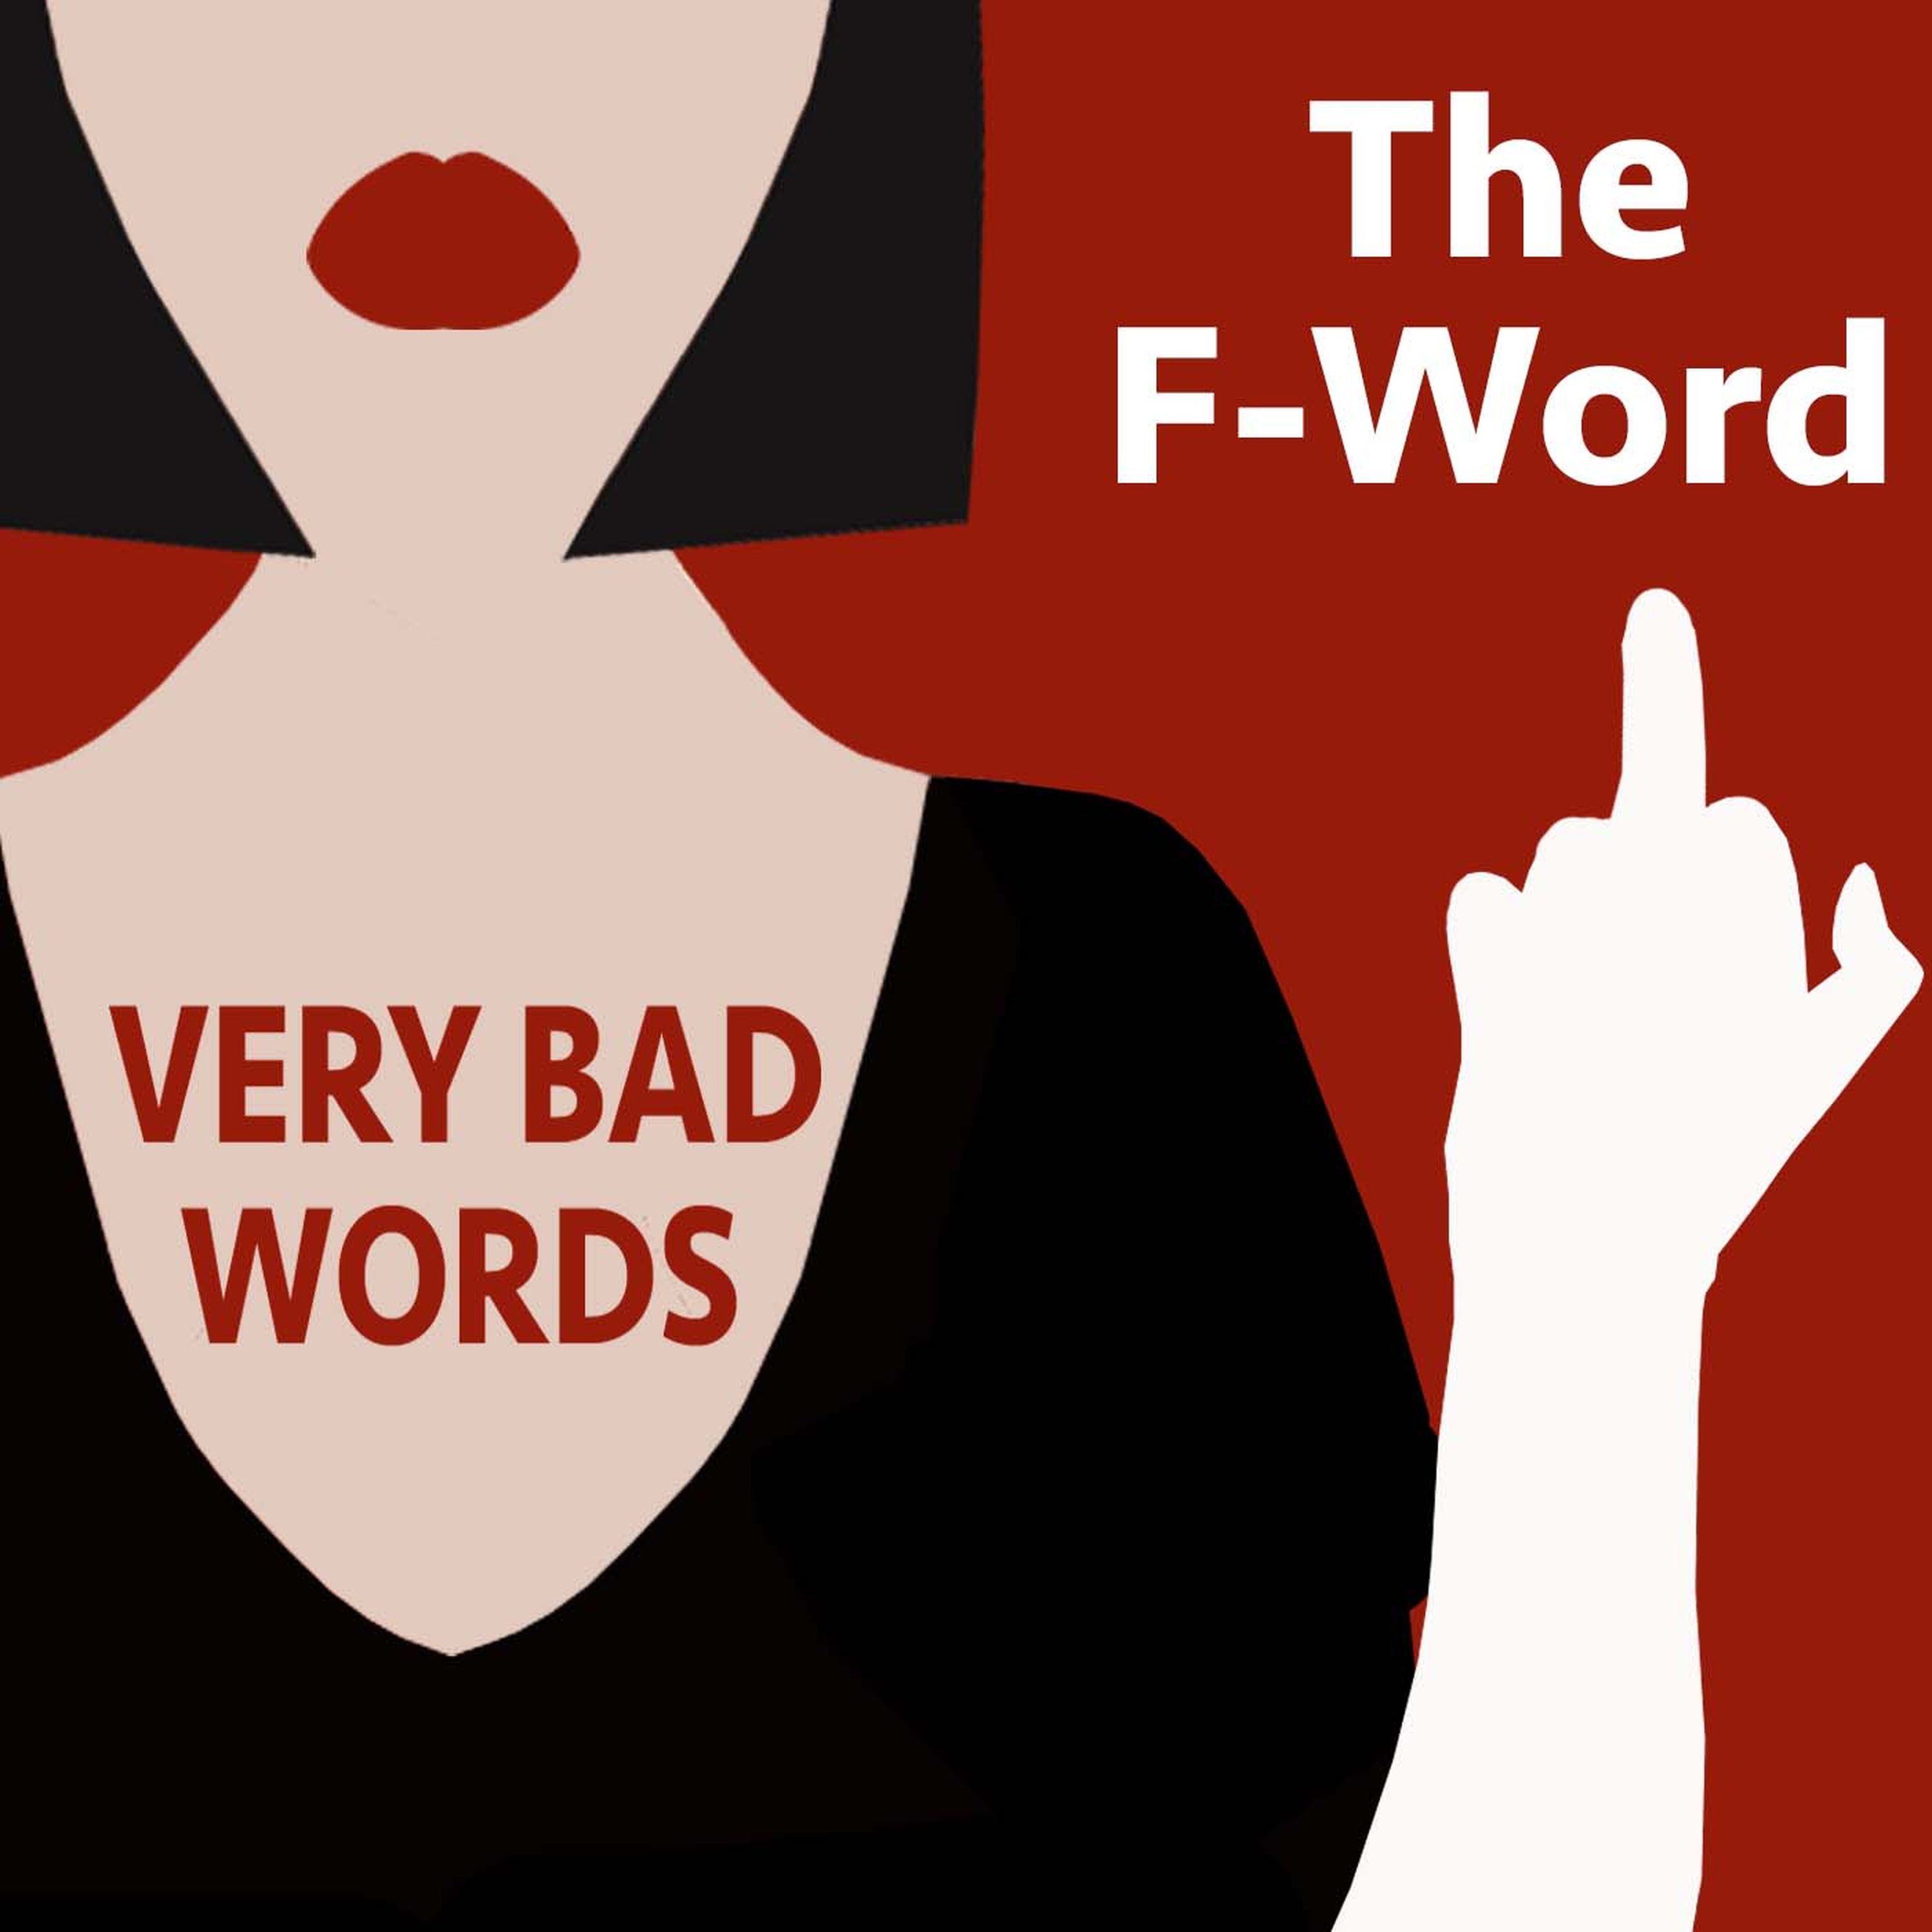 What is the F word swear words?